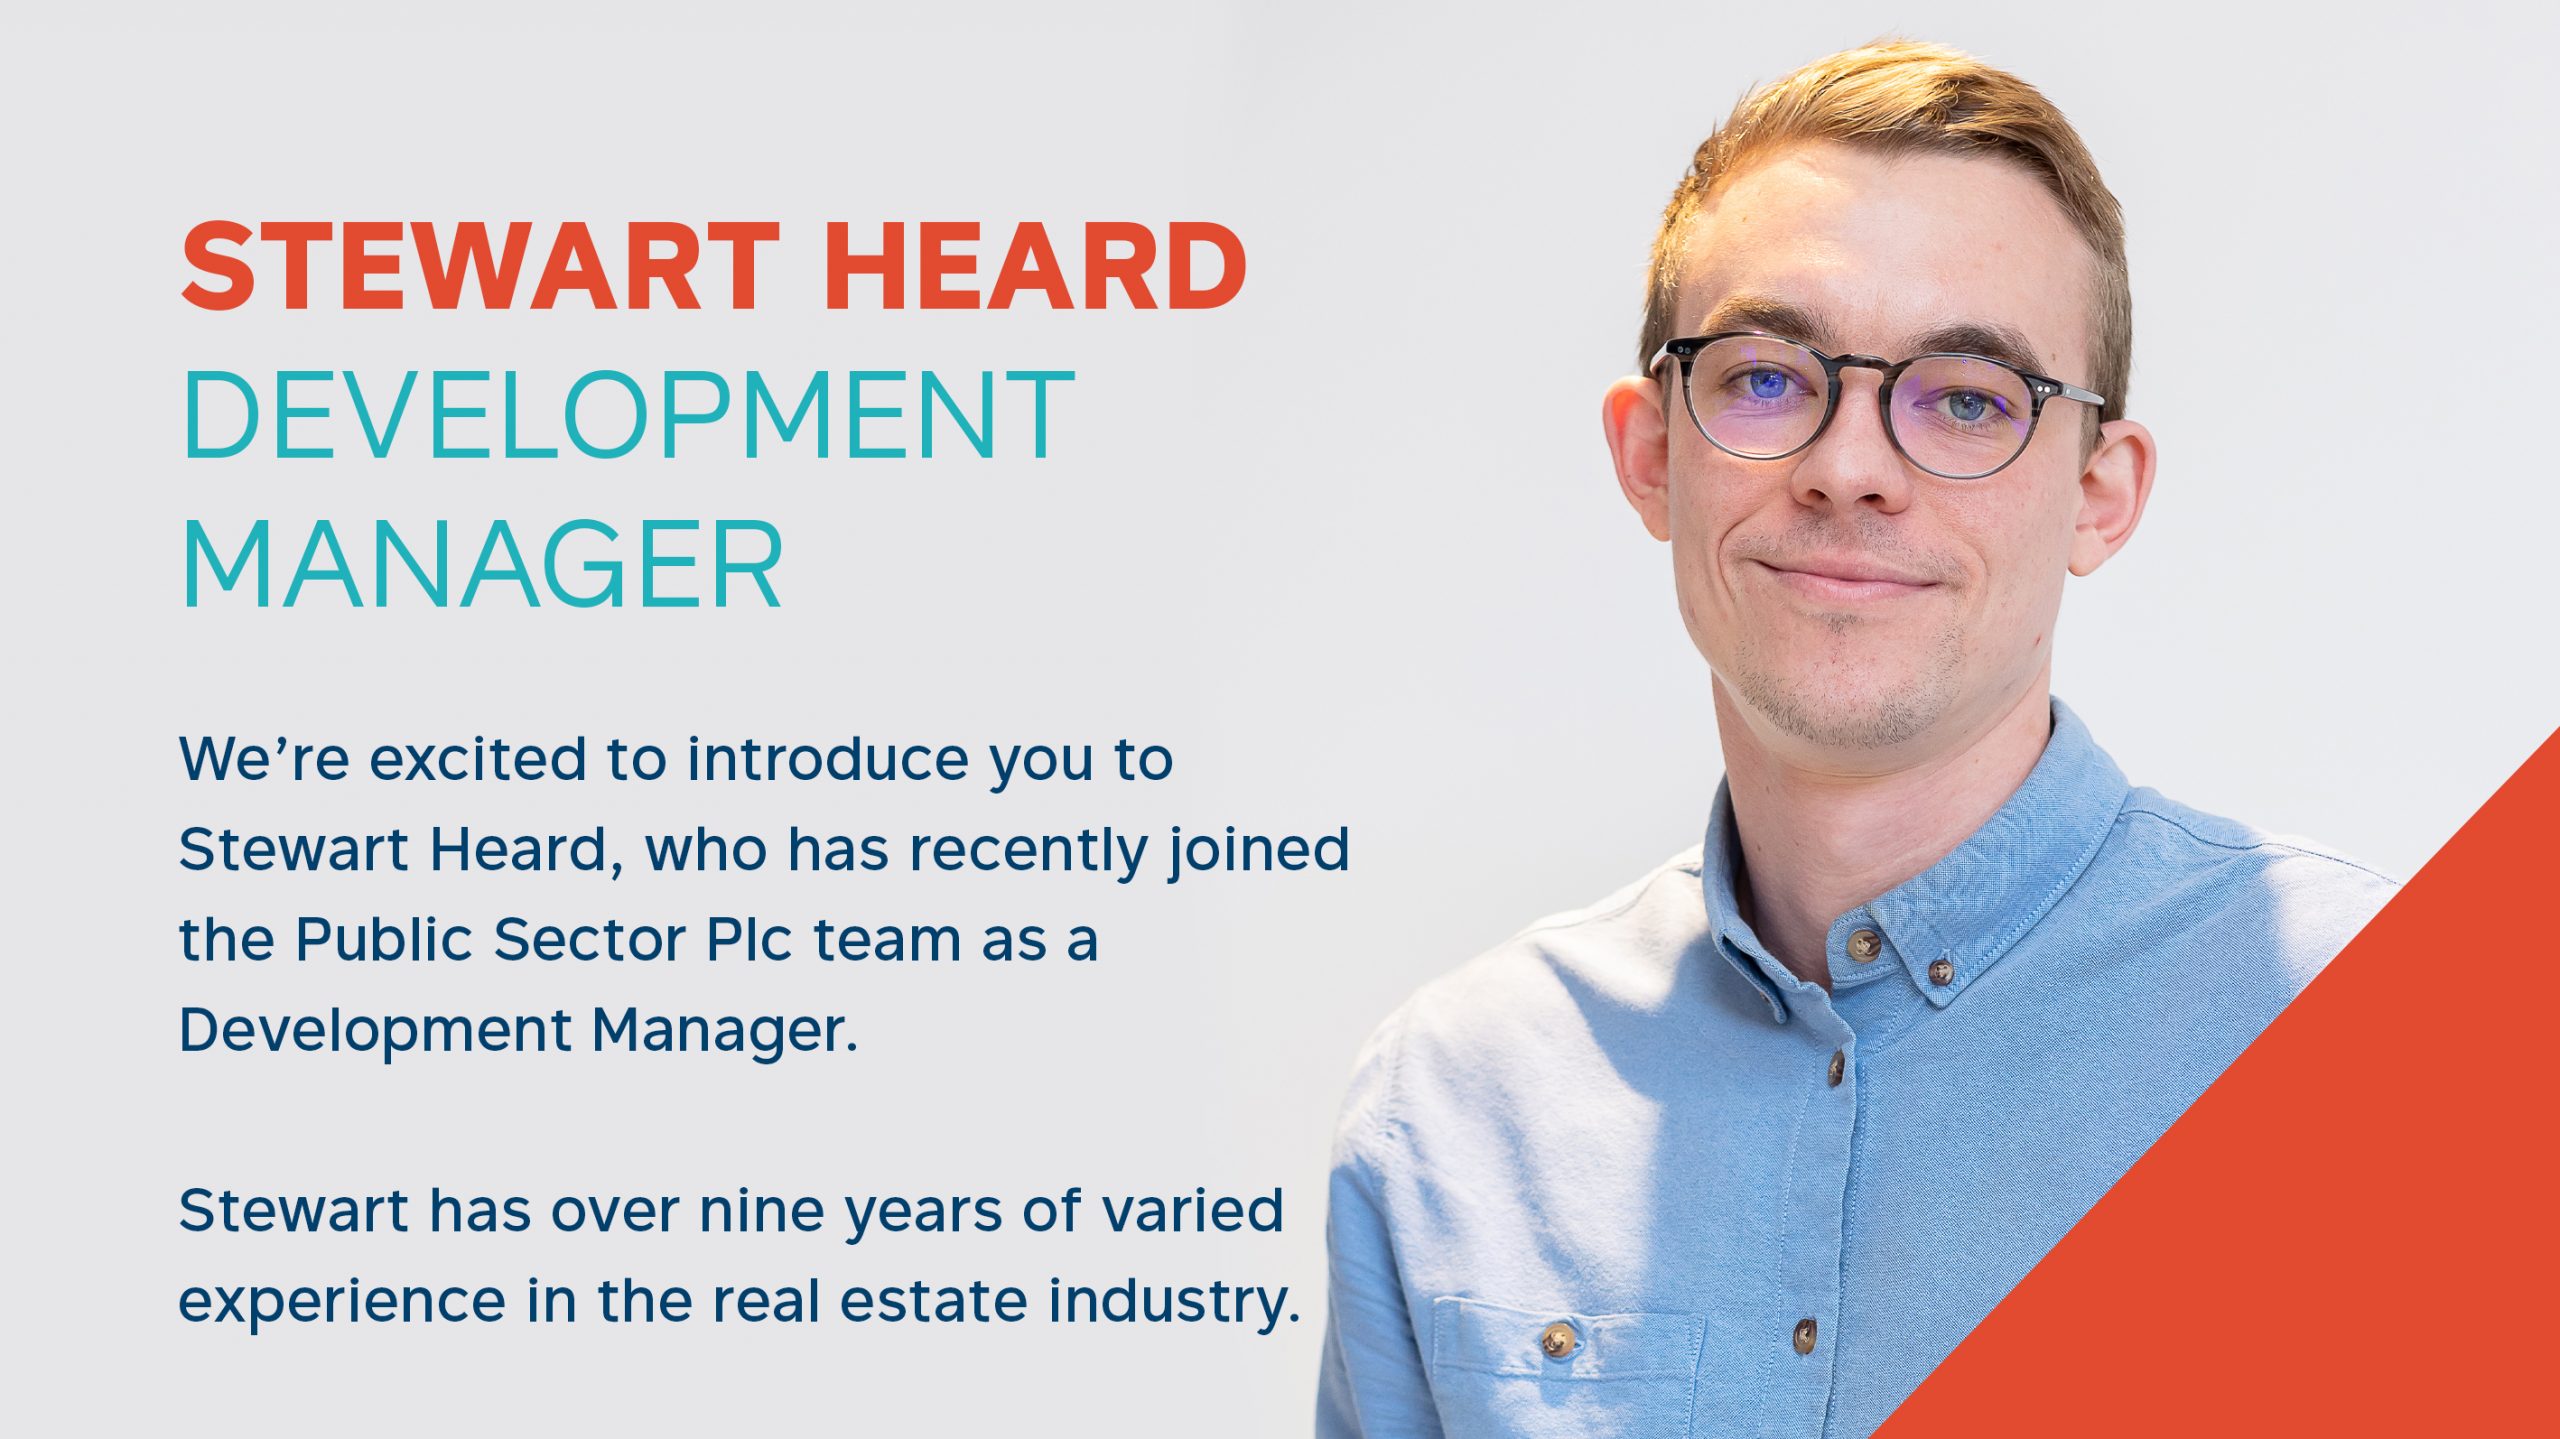 We’re excited to introduce you to the newest member of the Public Sector Plc team, Stewart Heard, Development Manager